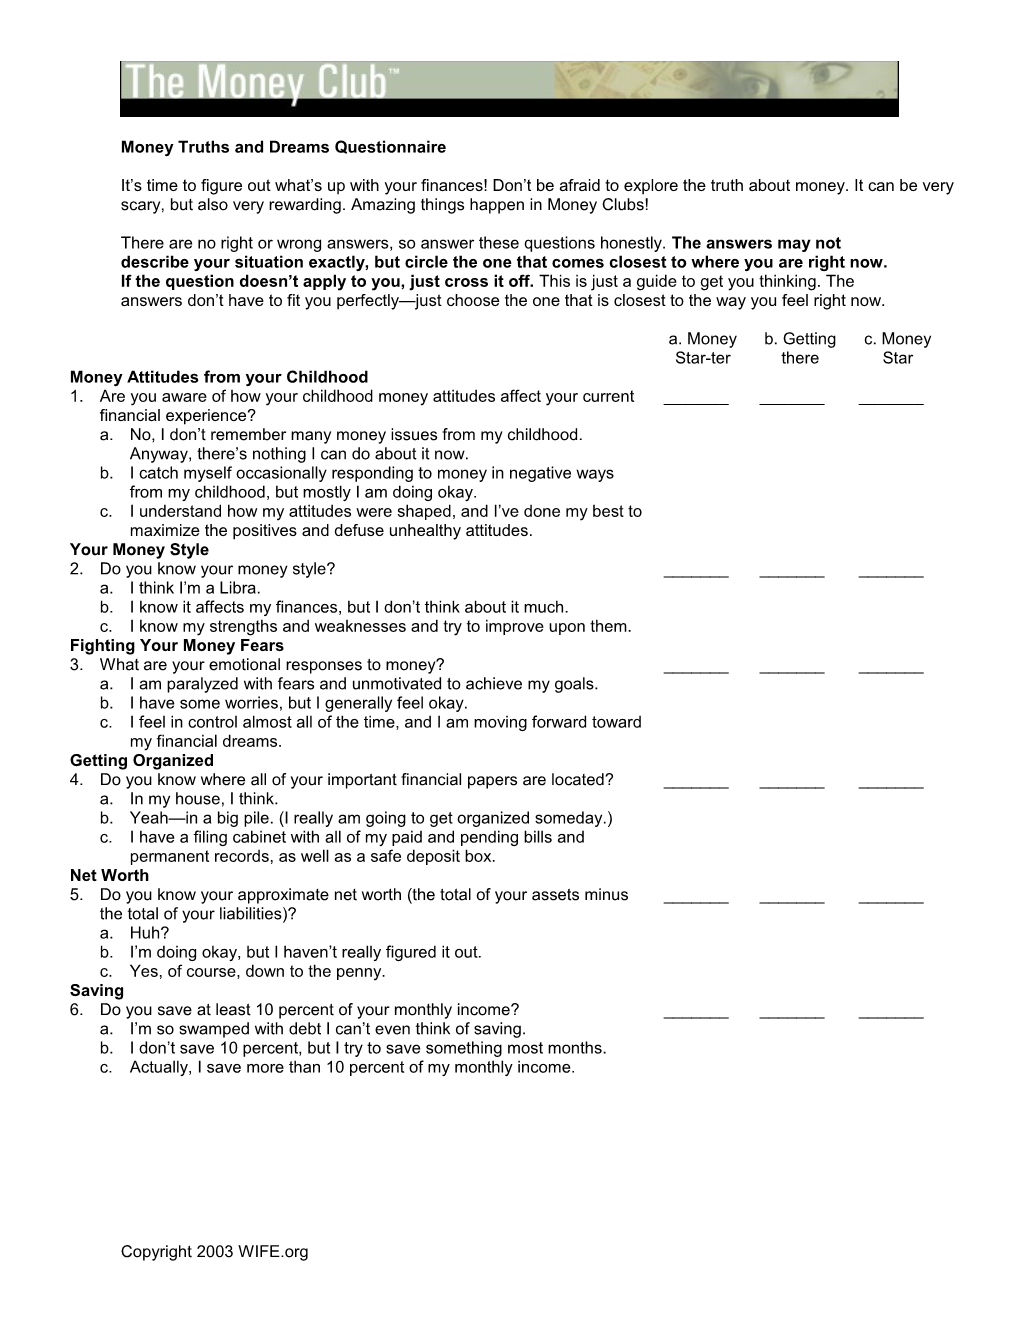 Money Dreams and Truths Worksheet